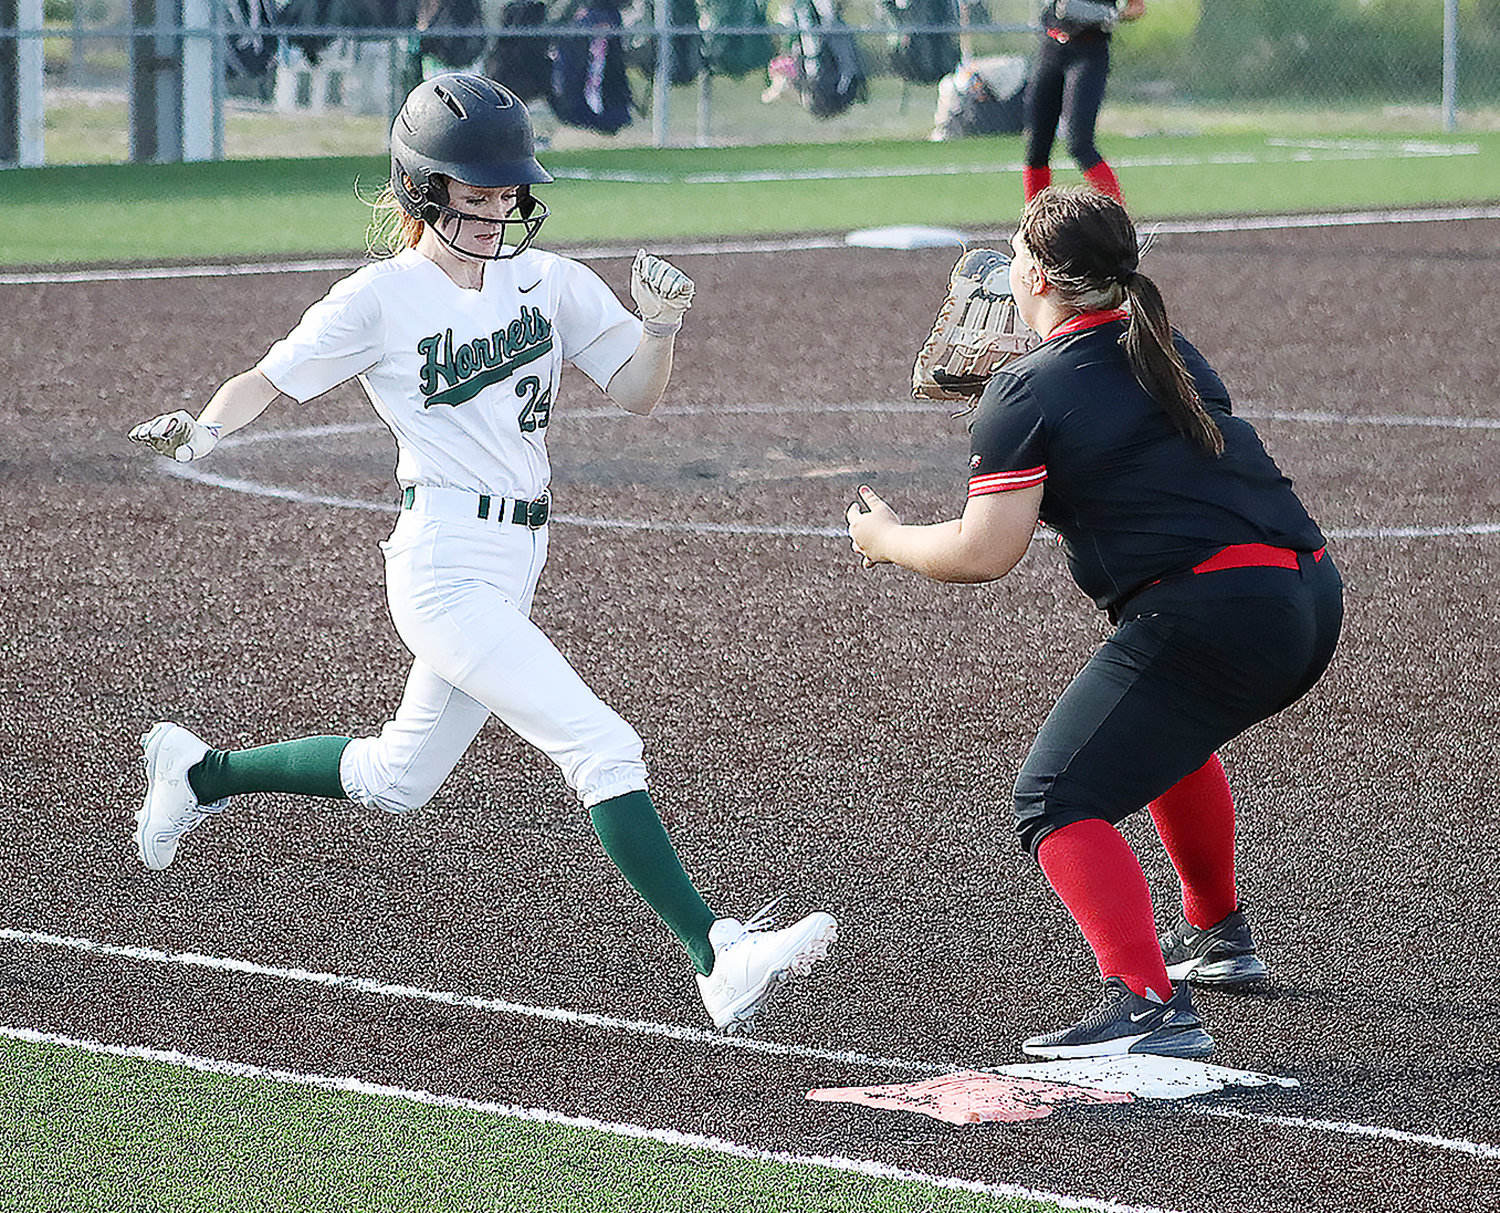 Westran's Lauren Harlan beats Knox County's defense to the bag for an infield single during the jamboree in Shelbina.